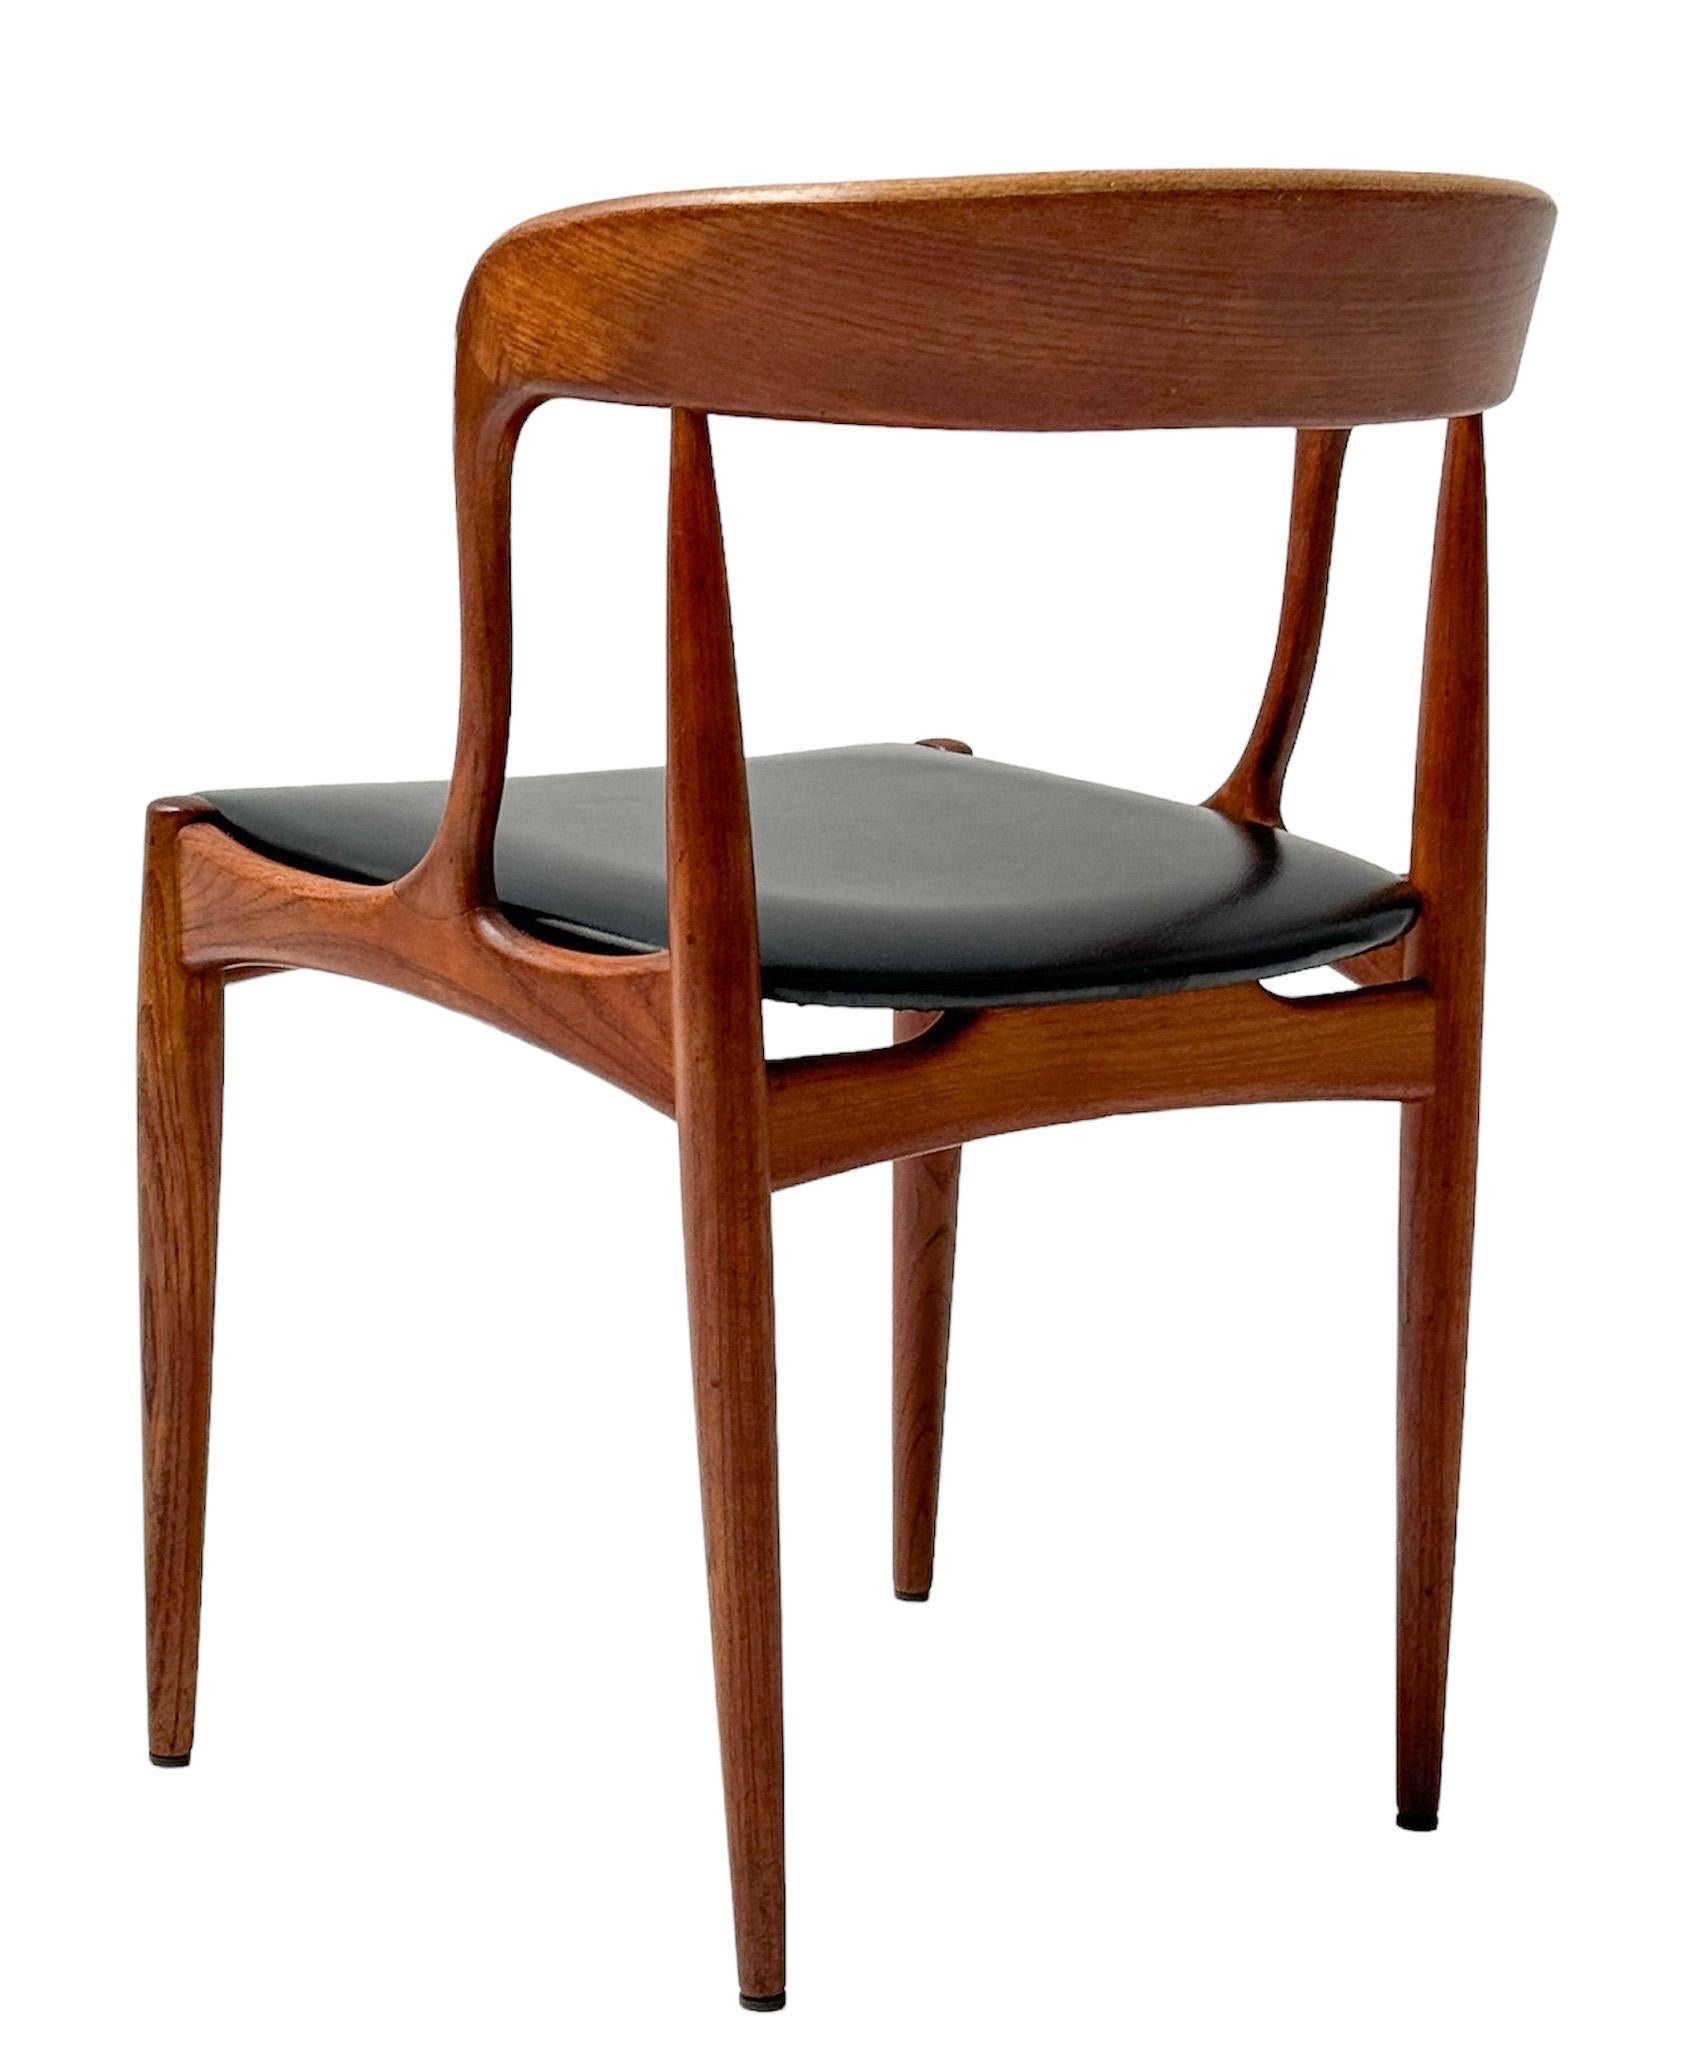 Four Teak Mid-Century Modern Dining Chairs by Johannes Andersen for Uldum, 1960s For Sale 5